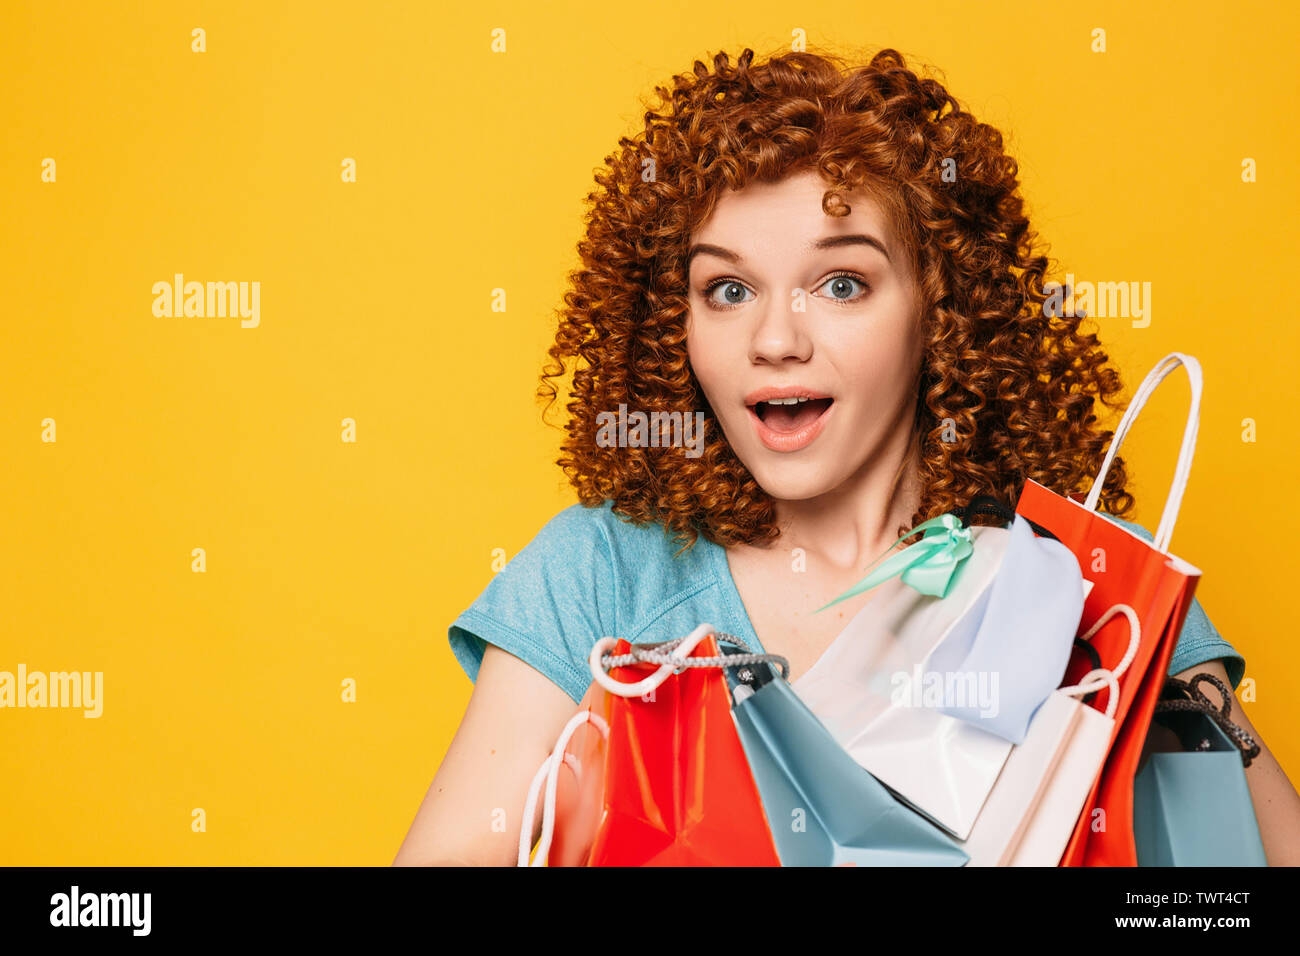 amazing Sale. Curly haired woman with shocked face holding bags with purchase on yellow background Stock Photo